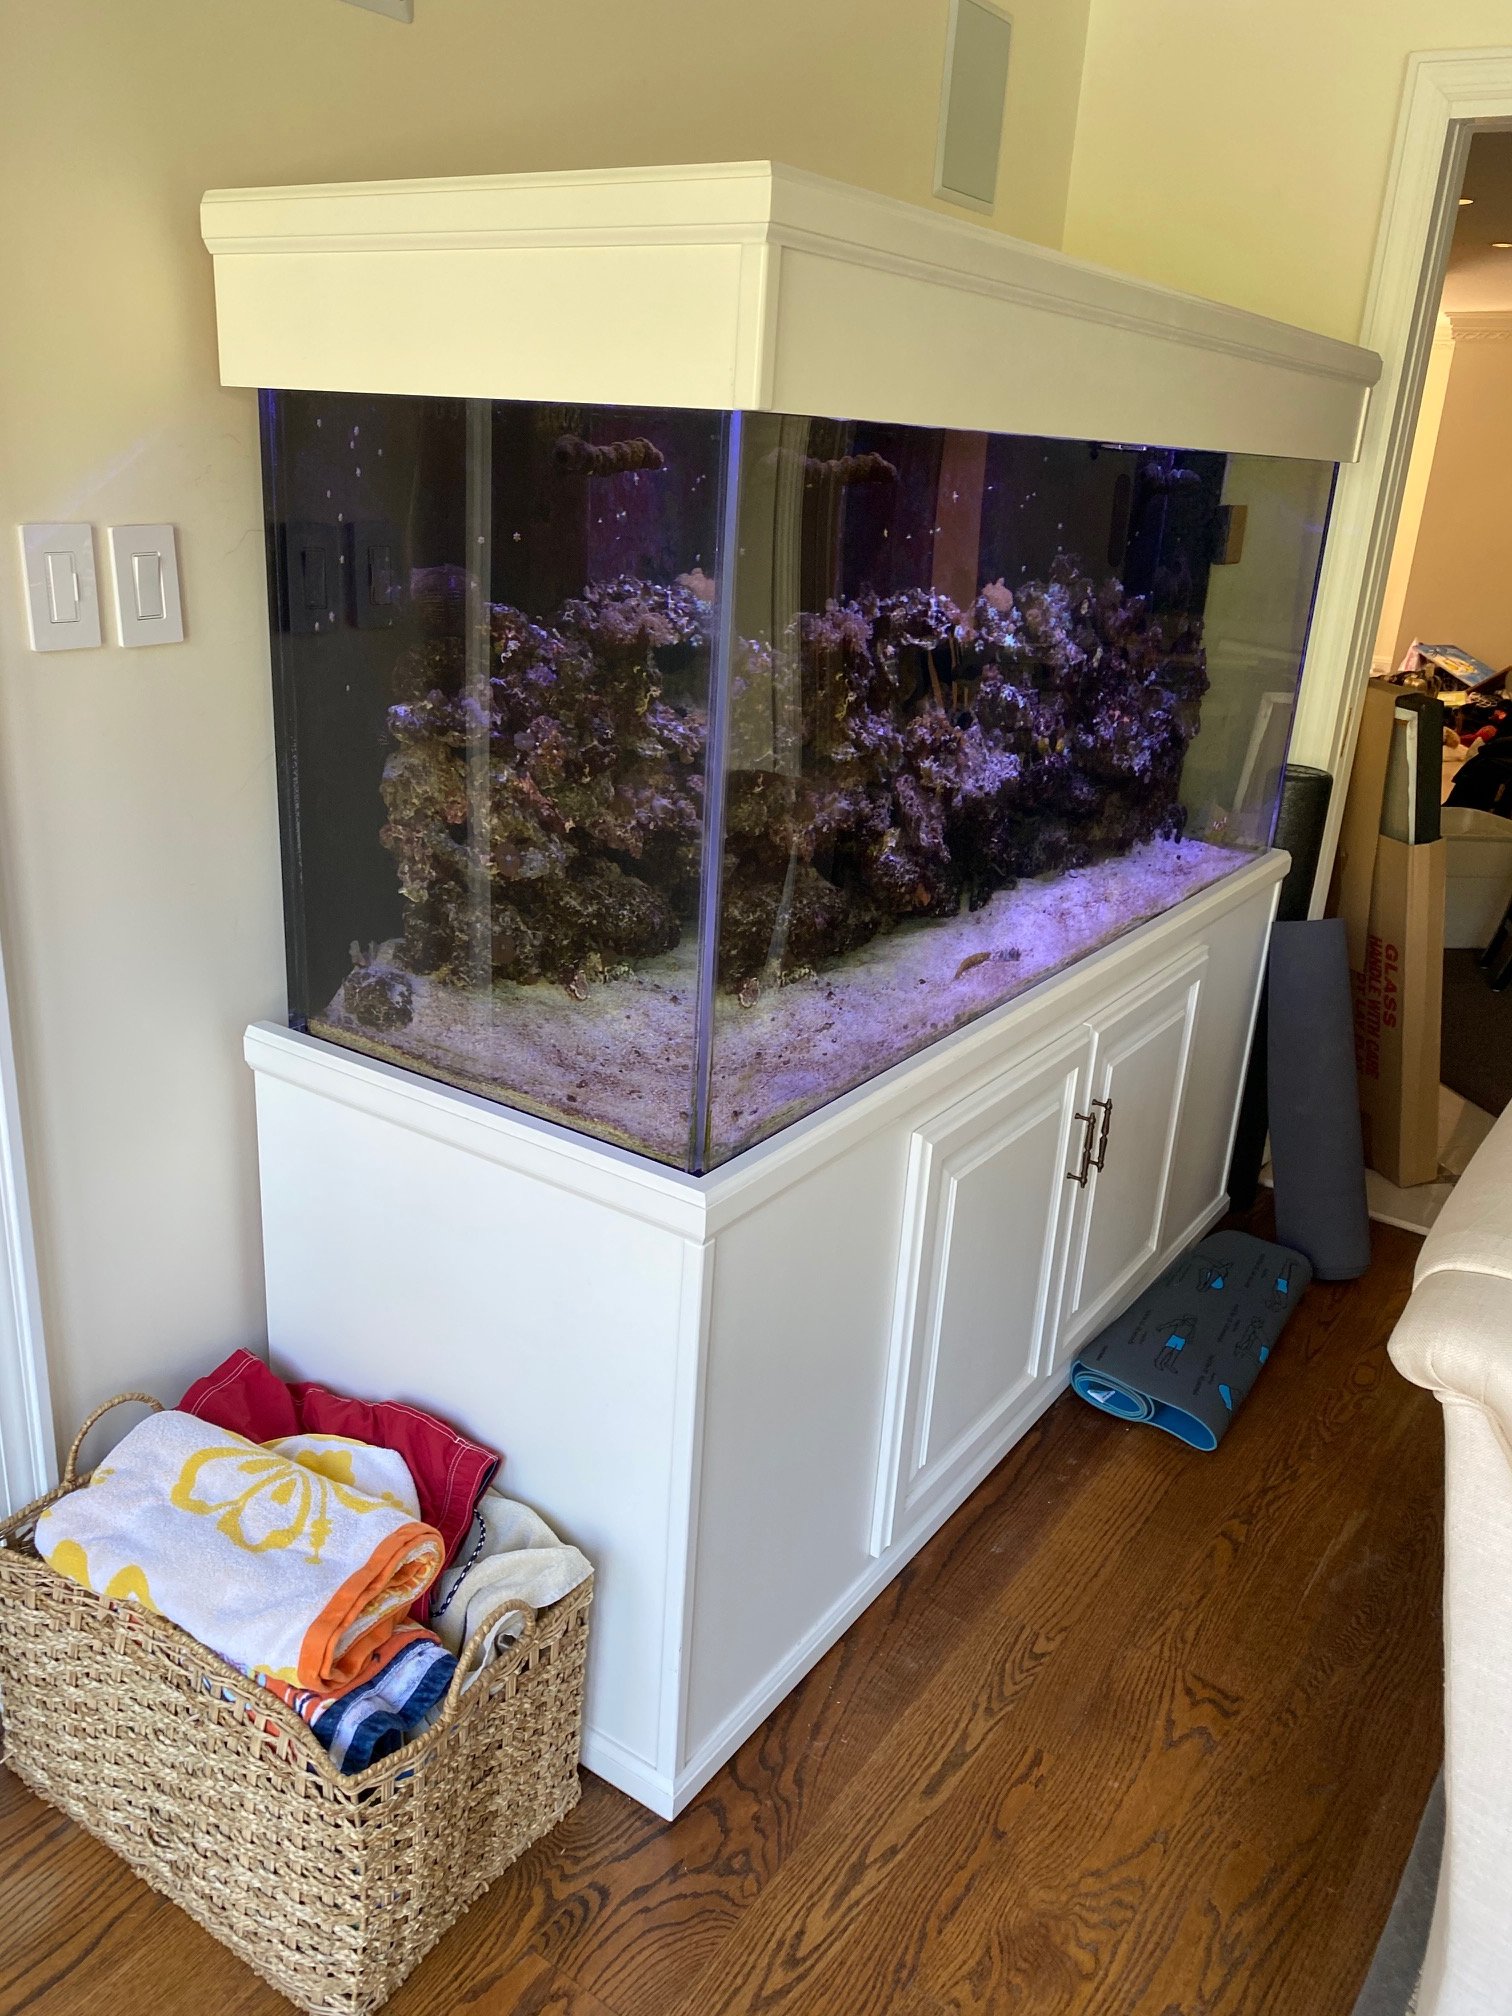 250 Gallon Acrylic Tank for Sale (about 11 years old)